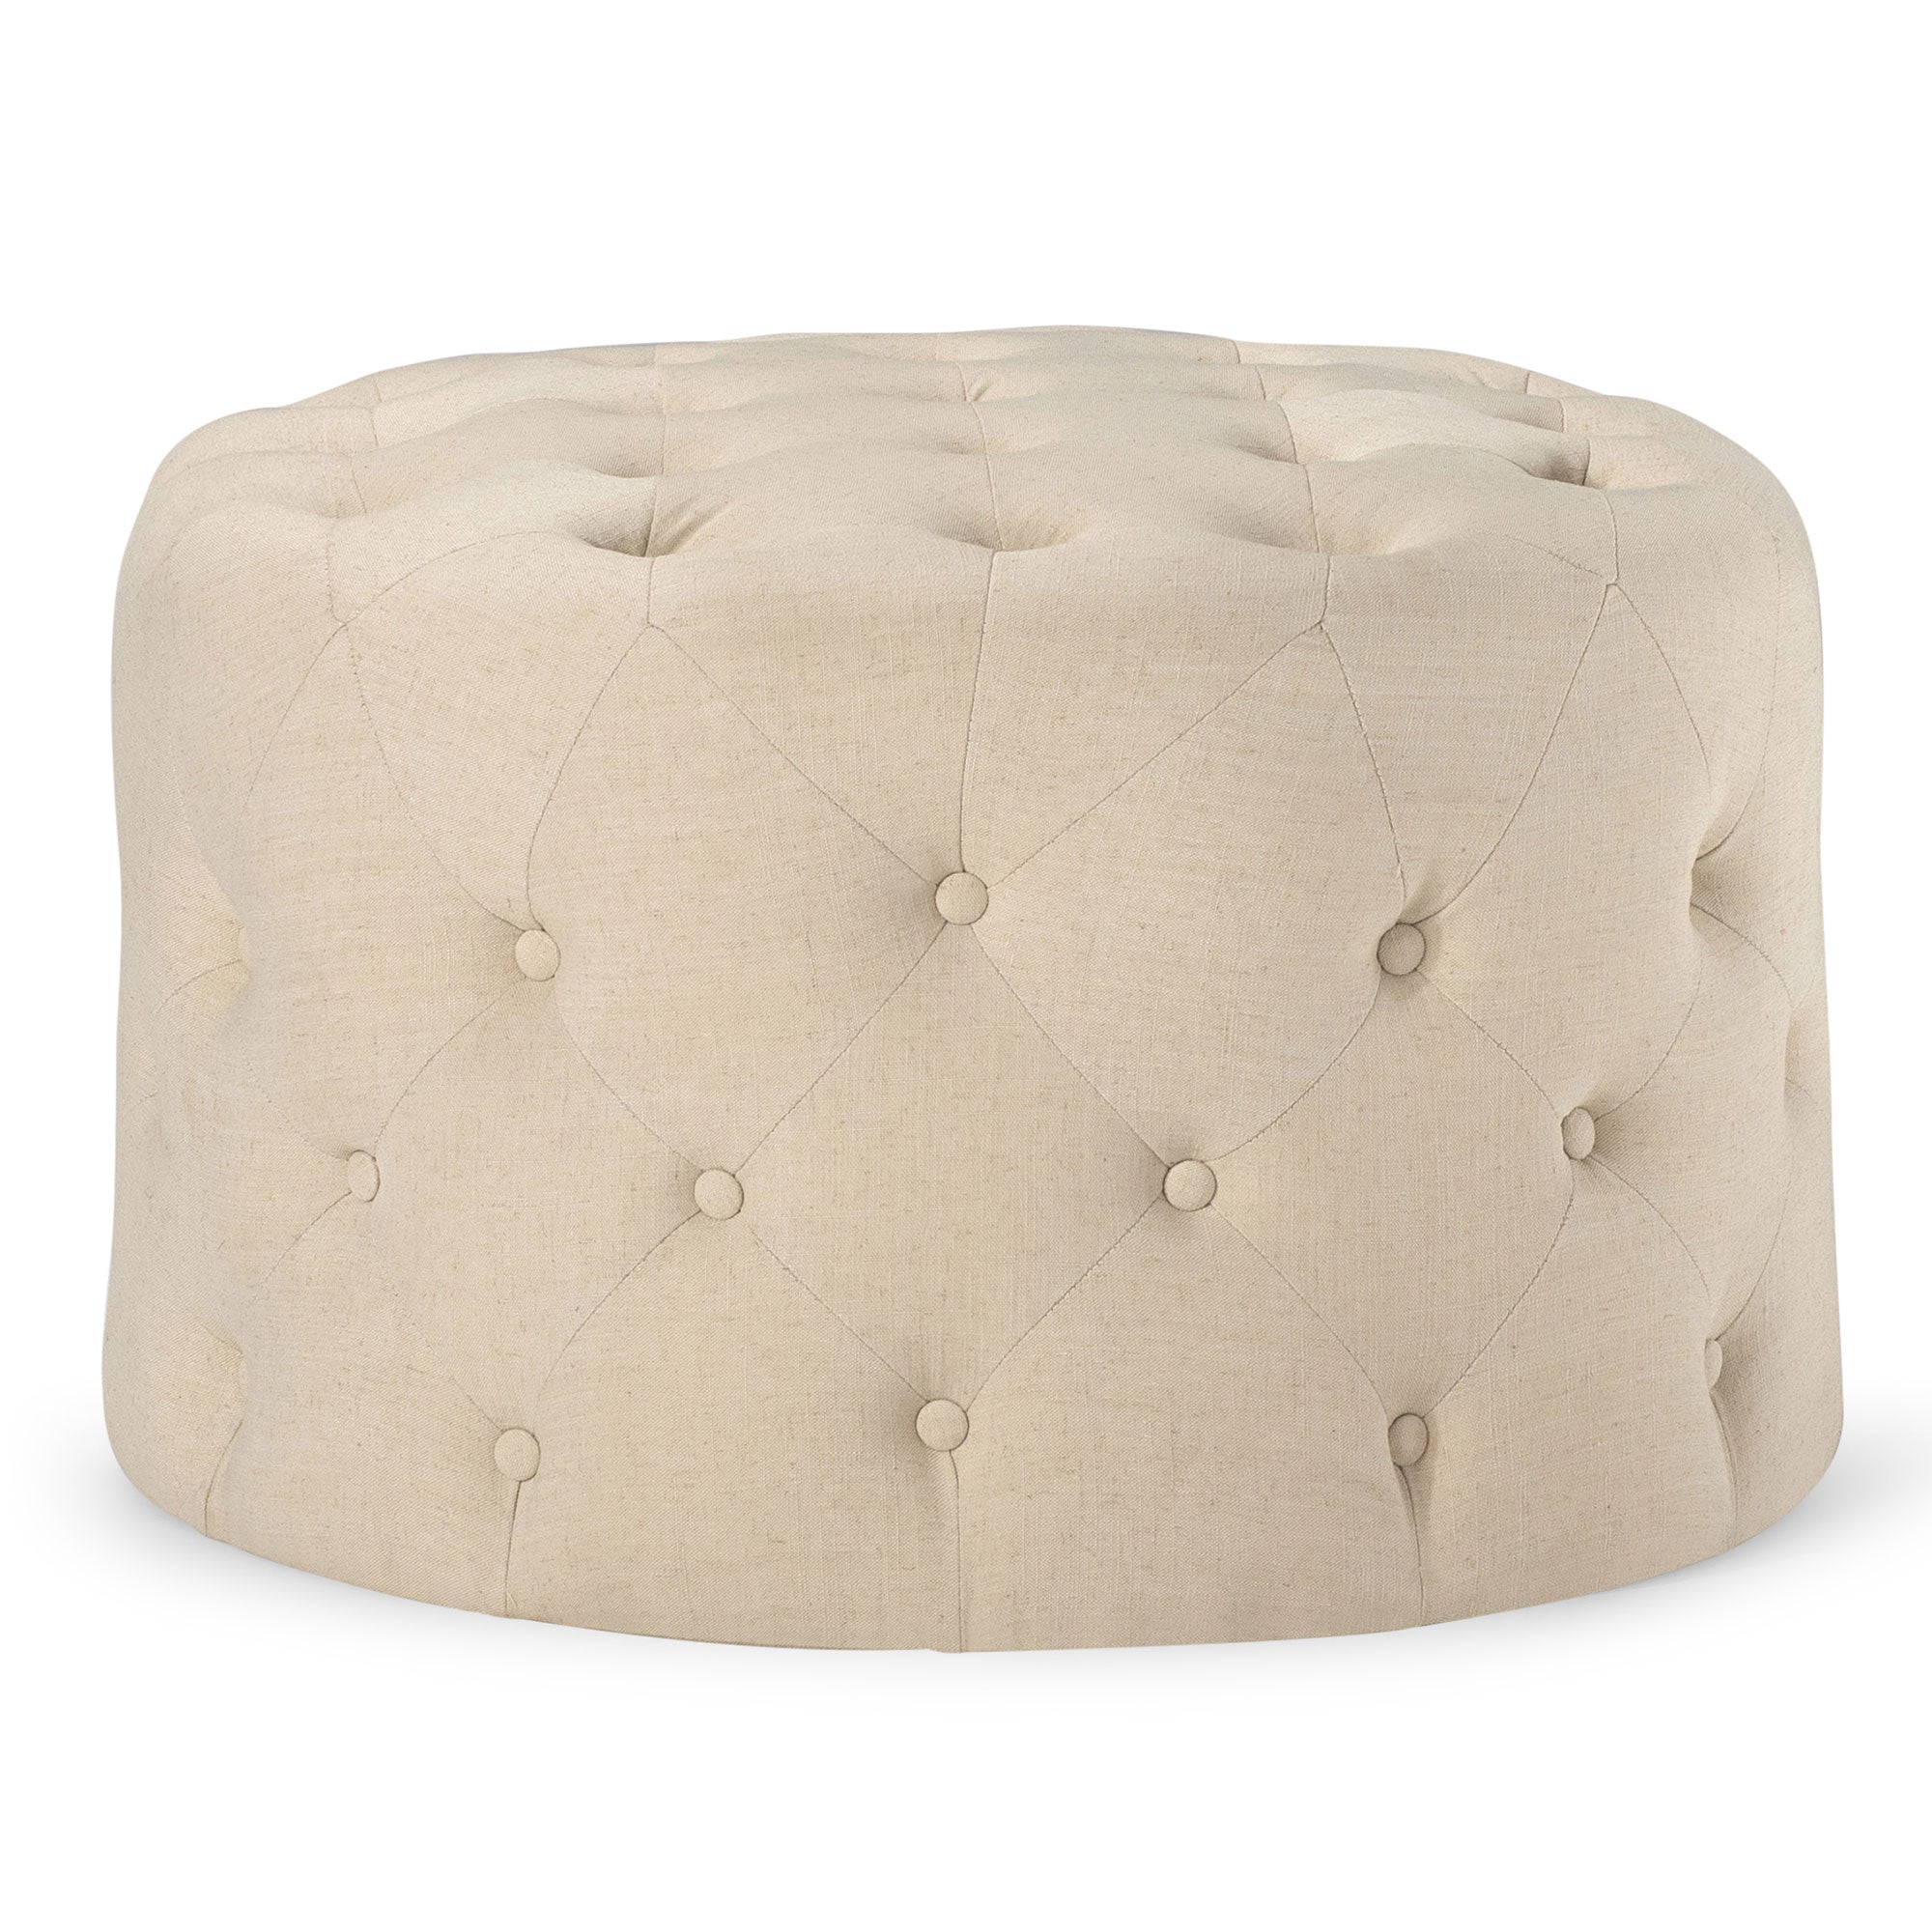 Maven-Lane-Marcy-Traditional-Round-Ottoman-in-Taupe-Fabric-Upholstery-Ottomans-&-Poufs